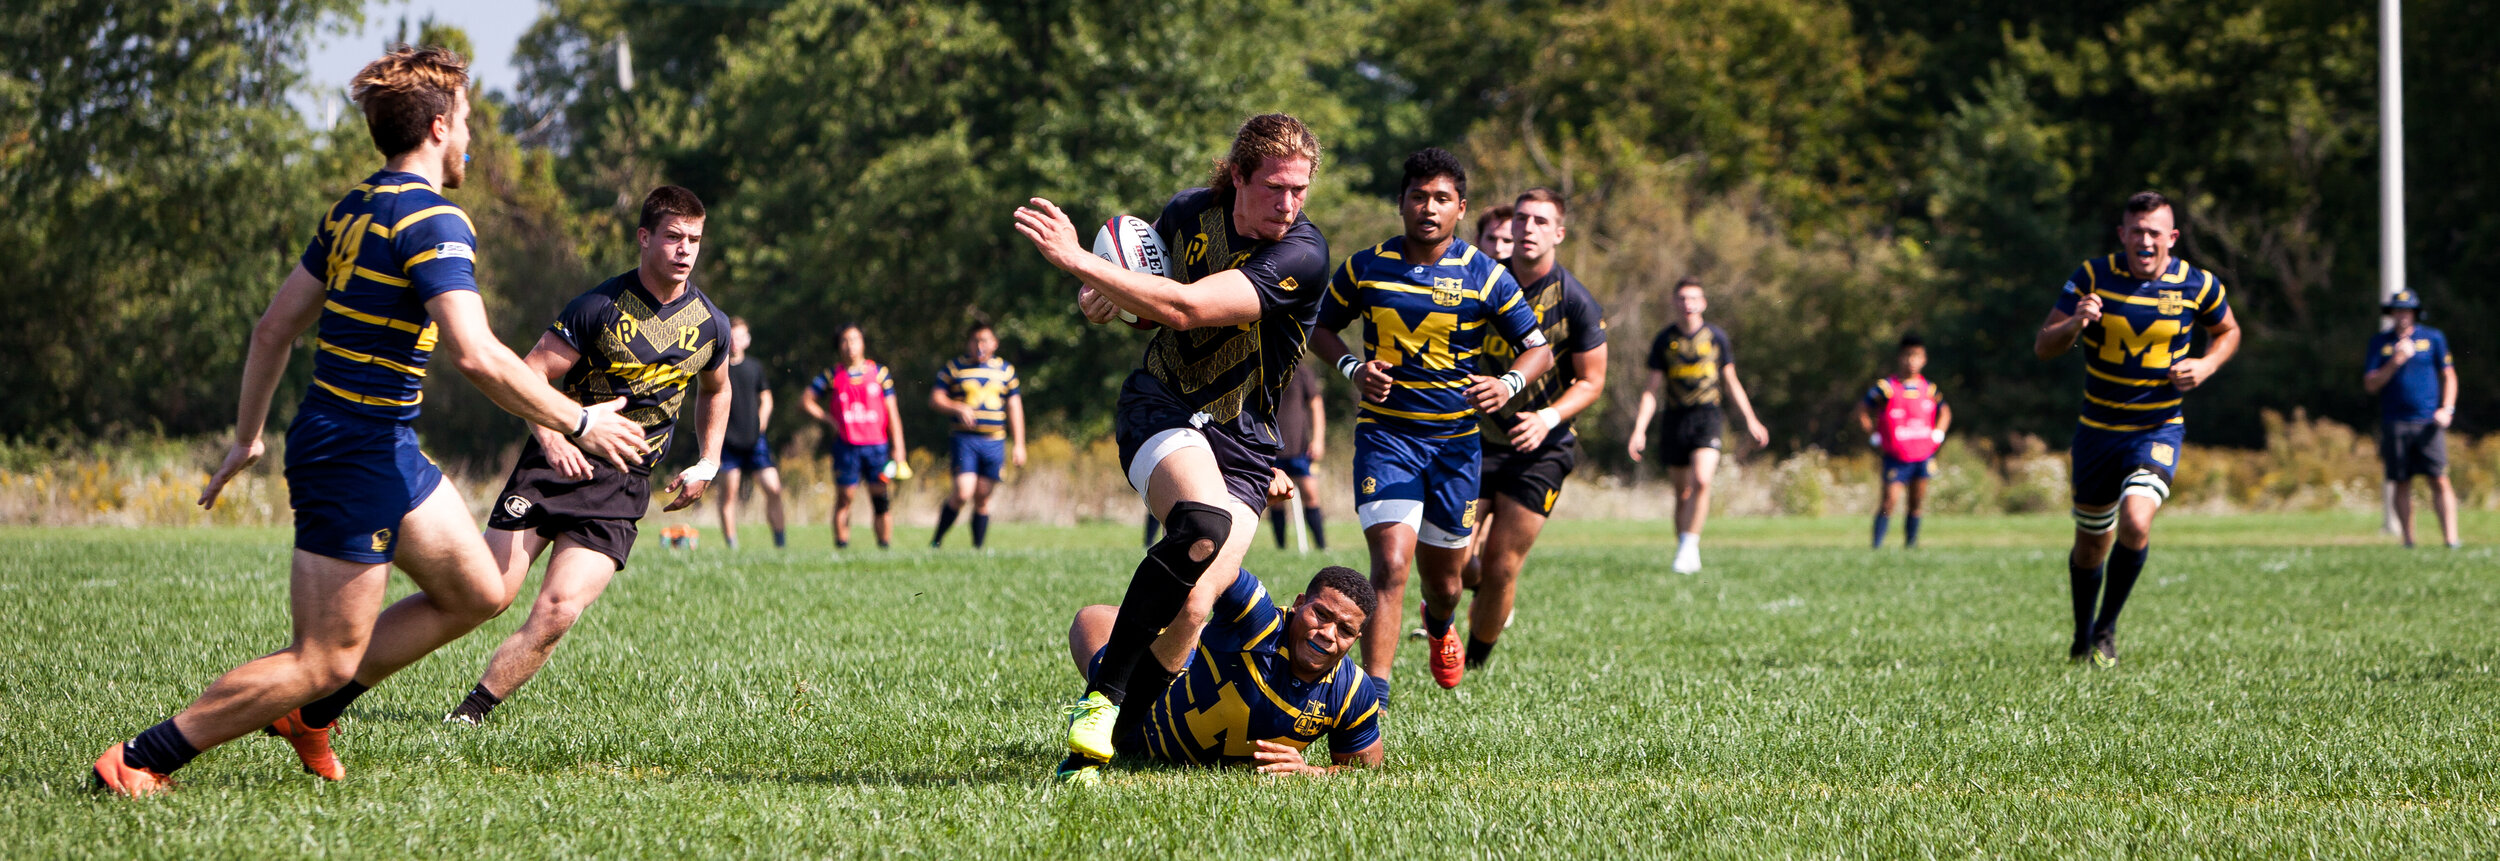  A member of the University of Iowa’s Men’s Rugby Team powers though an attempted tackle during a rugby match against the University of Michigan on Friday, Sep. 23, 2016. 